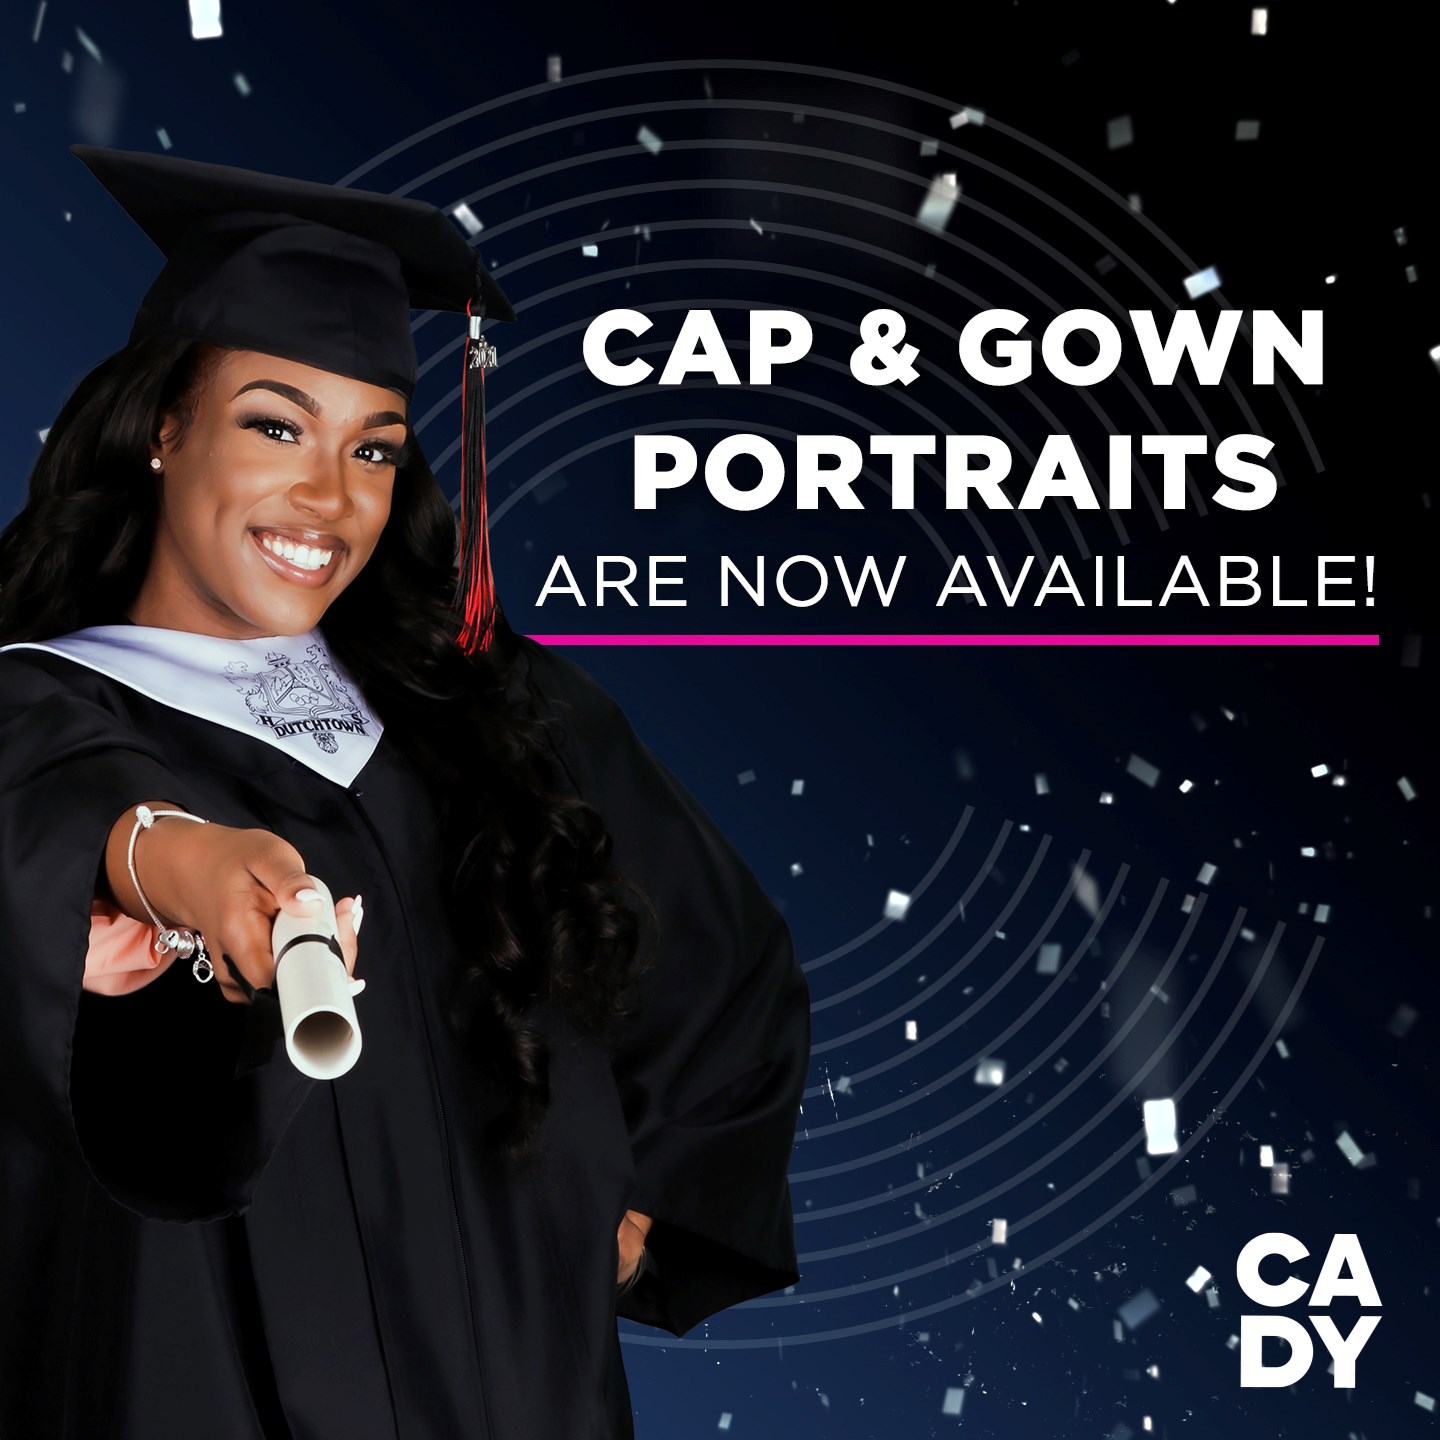 Cap and Gown Portraits are now available!